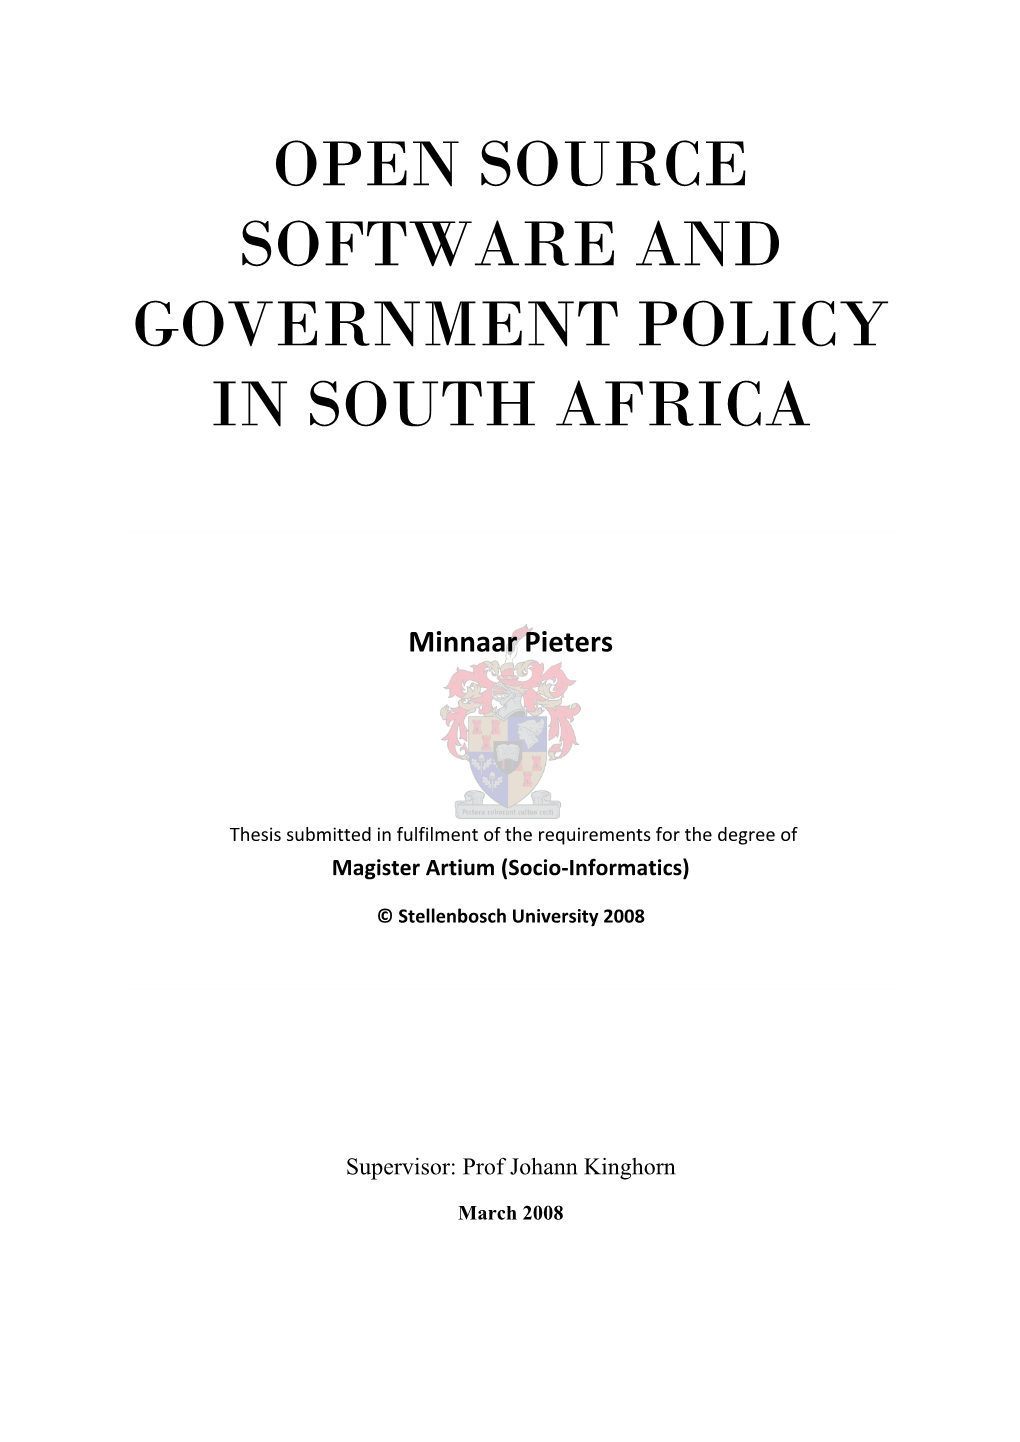 Open Source Software and Goverment Policy in South